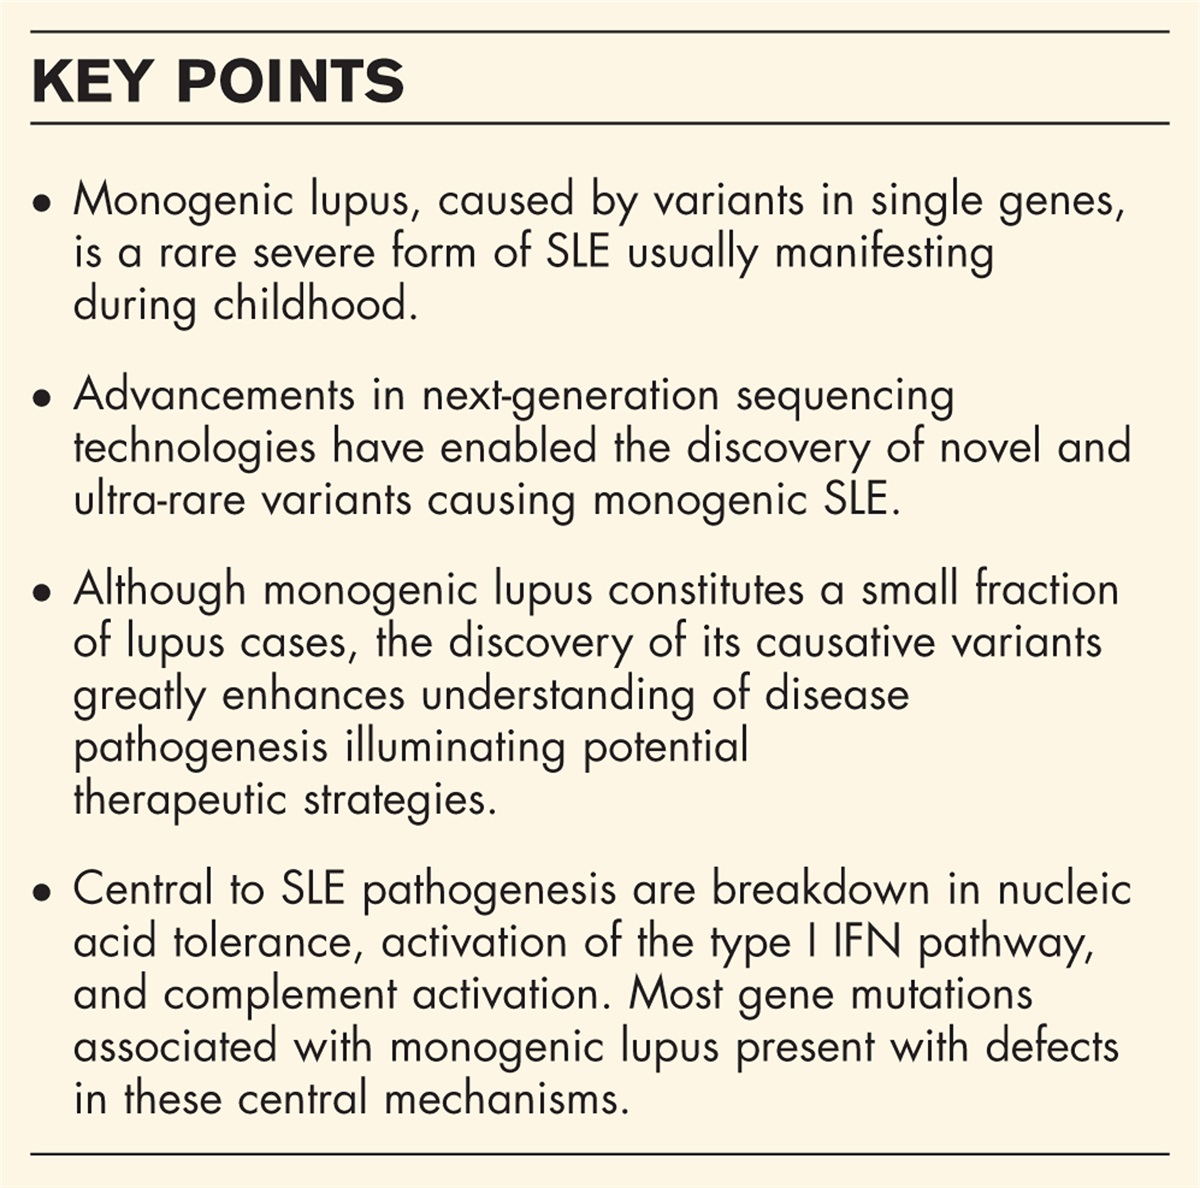 Monogenic lupus: insights into disease pathogenesis and therapeutic opportunities